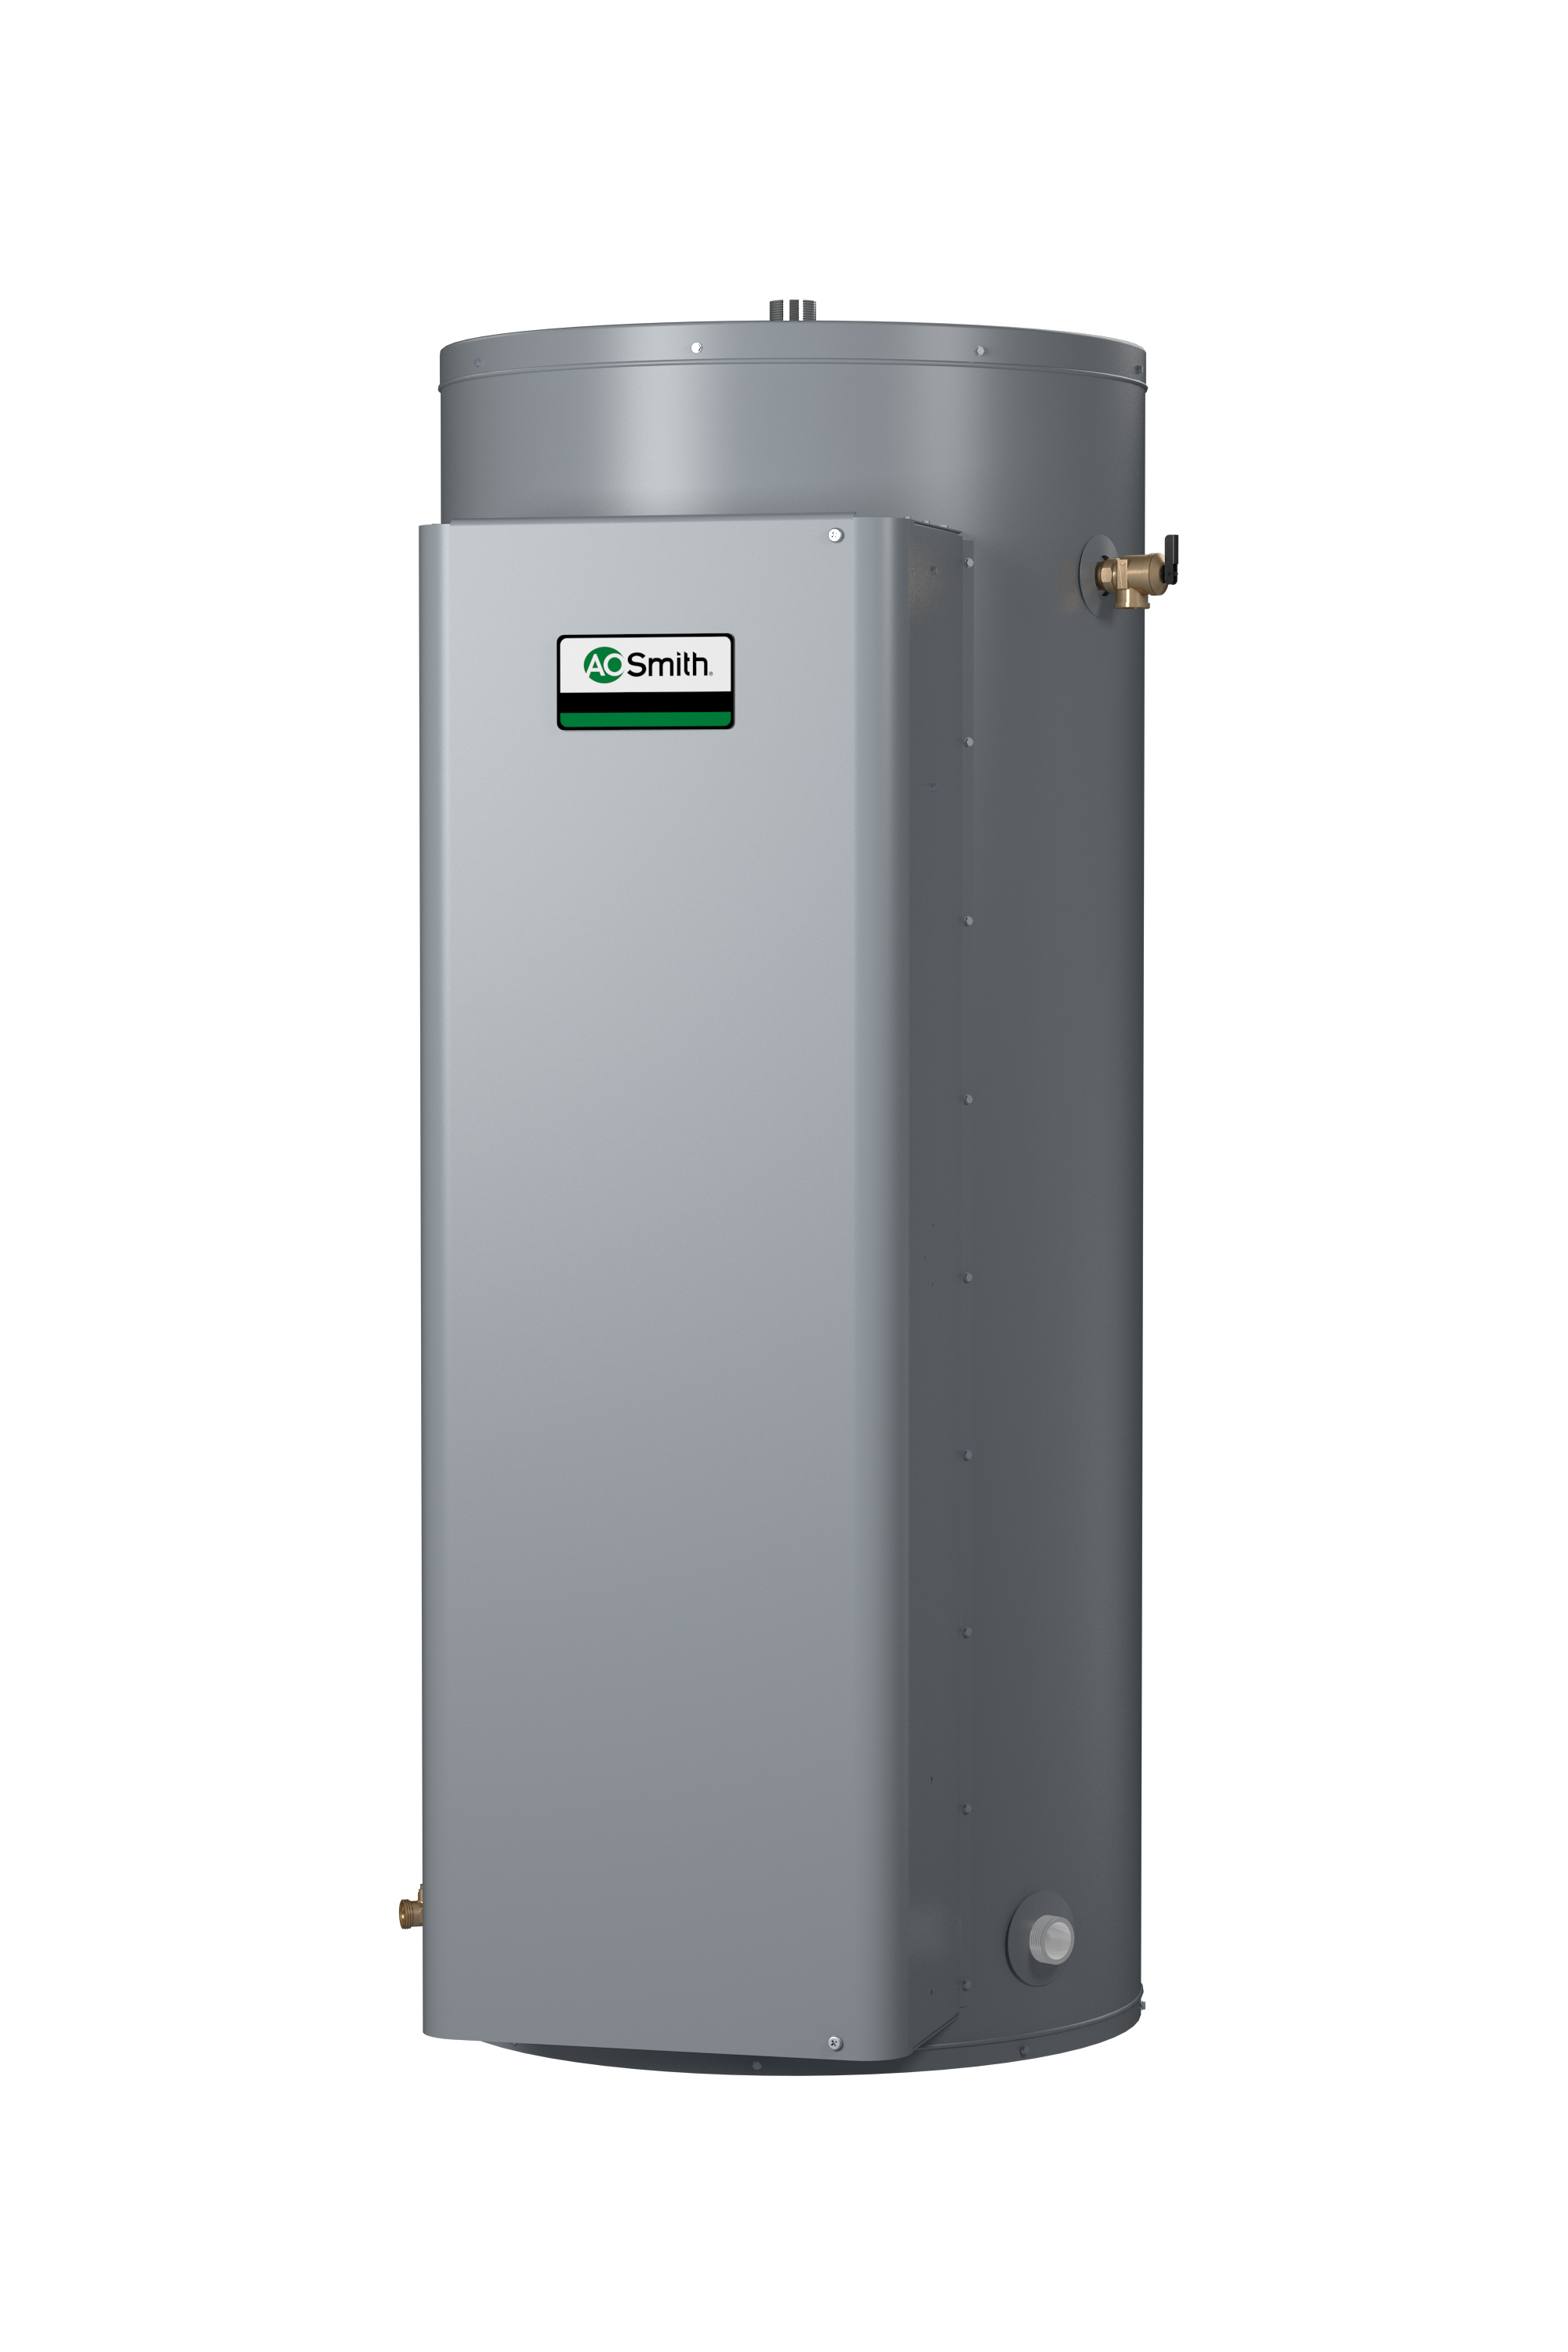 AO SMITH DRE-52-36, 50 GALLONS, 36.0KW, 480 VOLT, 43.3 AMPS, 3 PHASE, 6 ELEMENT, COMMERCIAL ELECTRIC WATER HEATER, GOLD SERIES